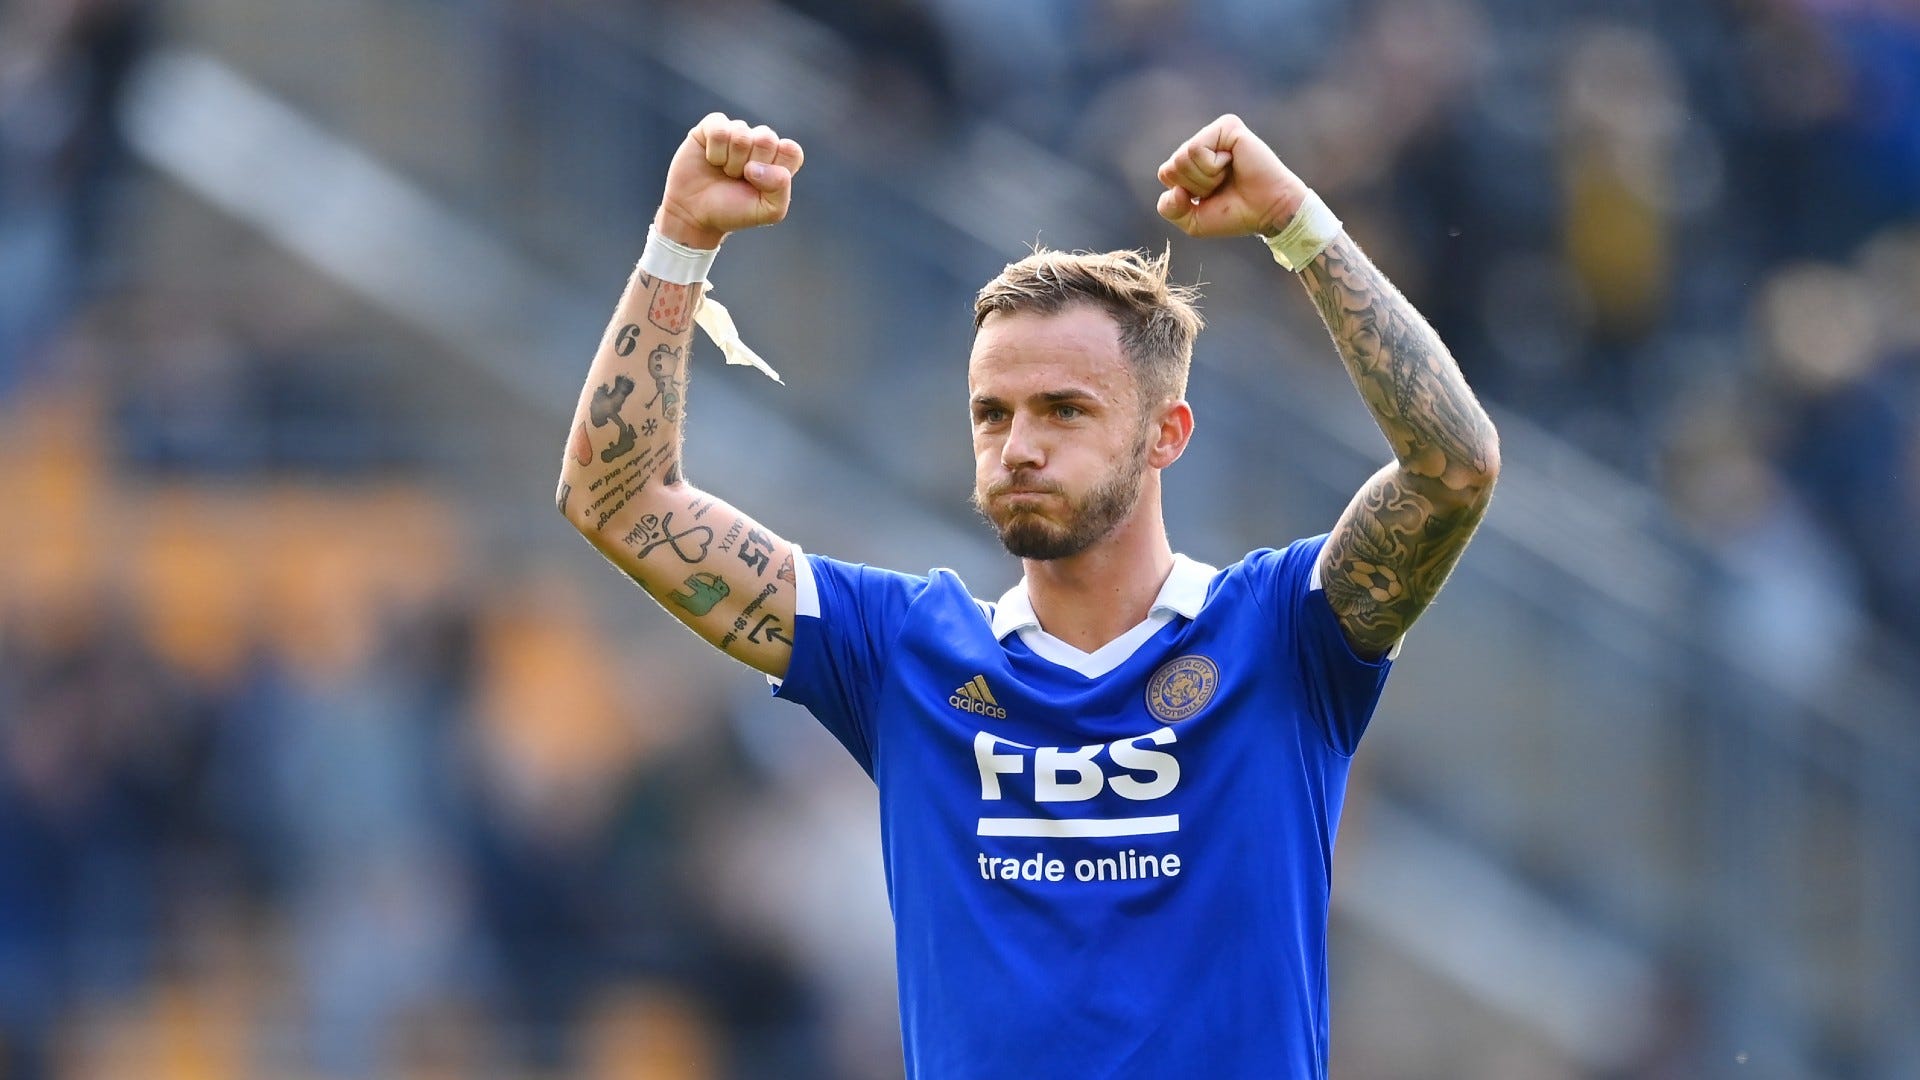 James Maddison seals £40m Spurs move from Leicester, Tottenham Hotspur